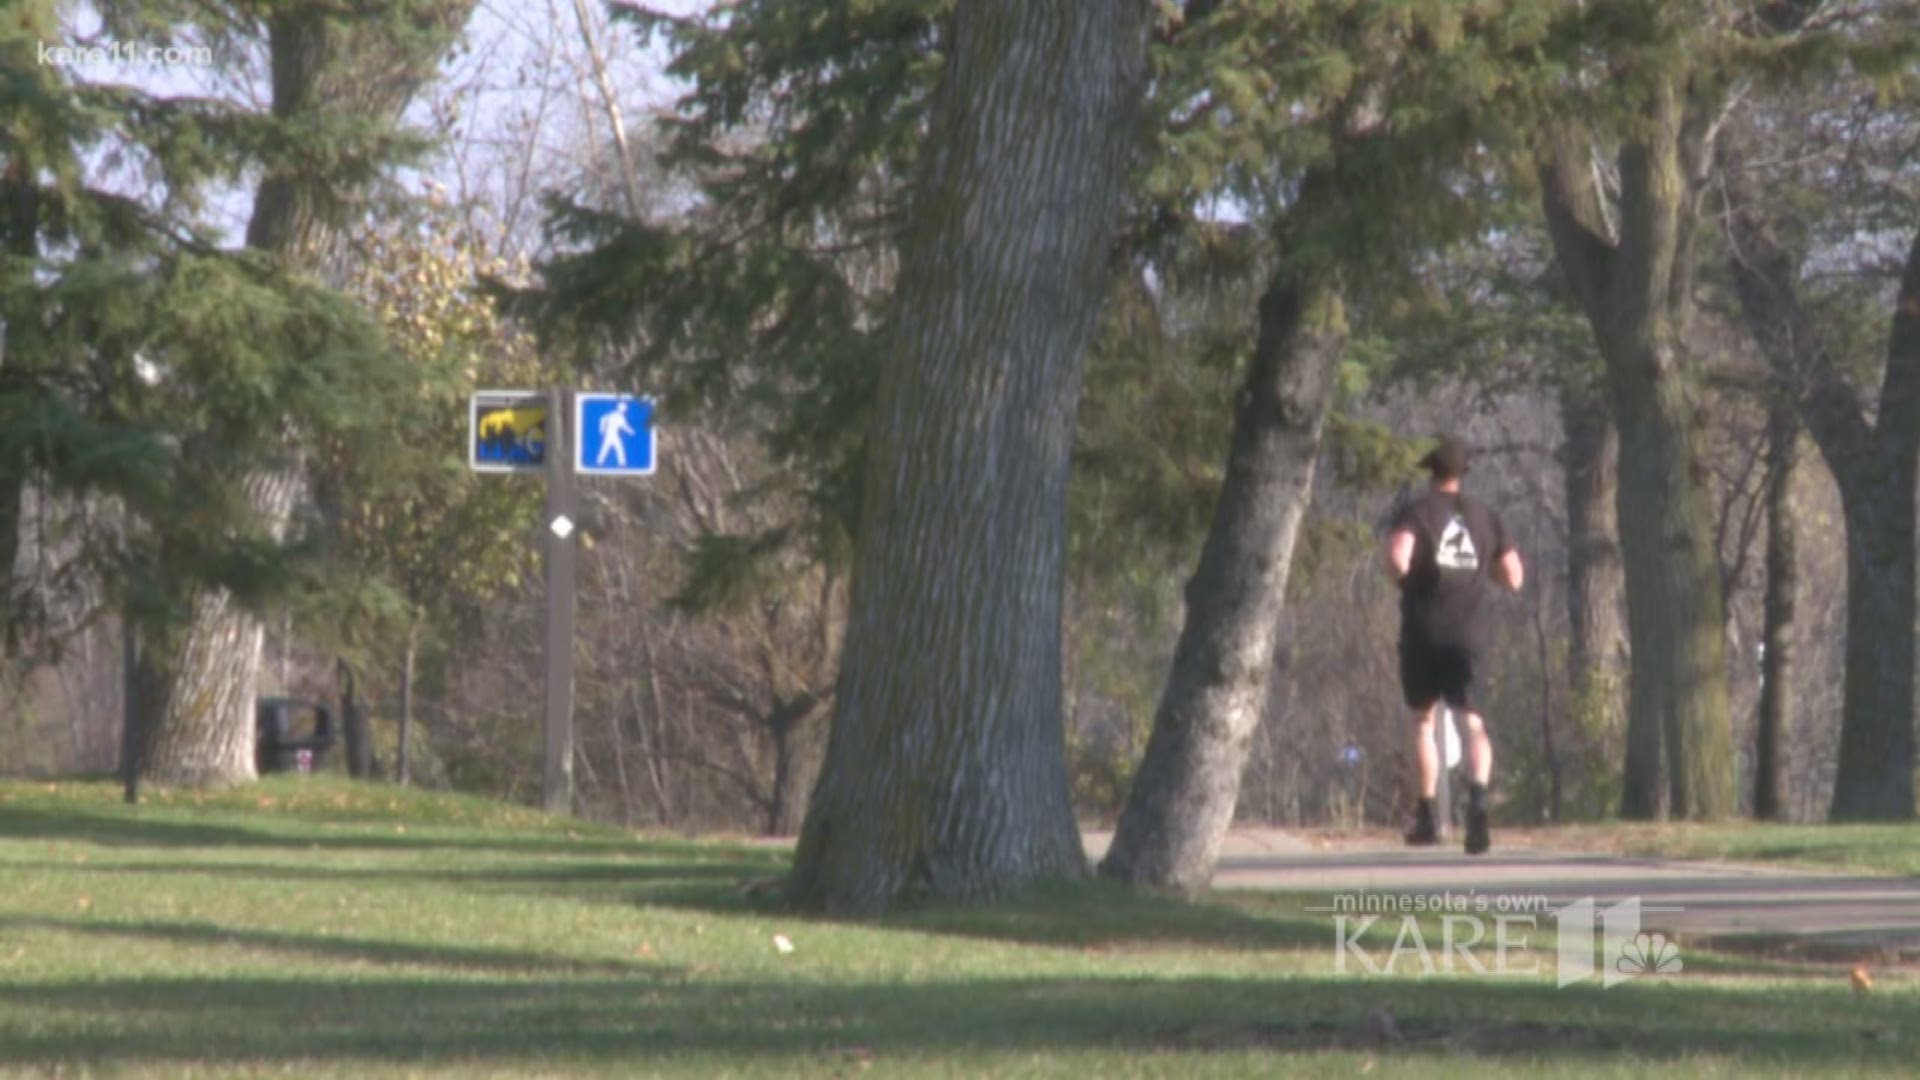 Running and walking can both be good for your health, but is one really better than the other for burning calories? Viewer Kelly Hoerter asked us to VERIFY. http://kare11.tv/2AHouWu